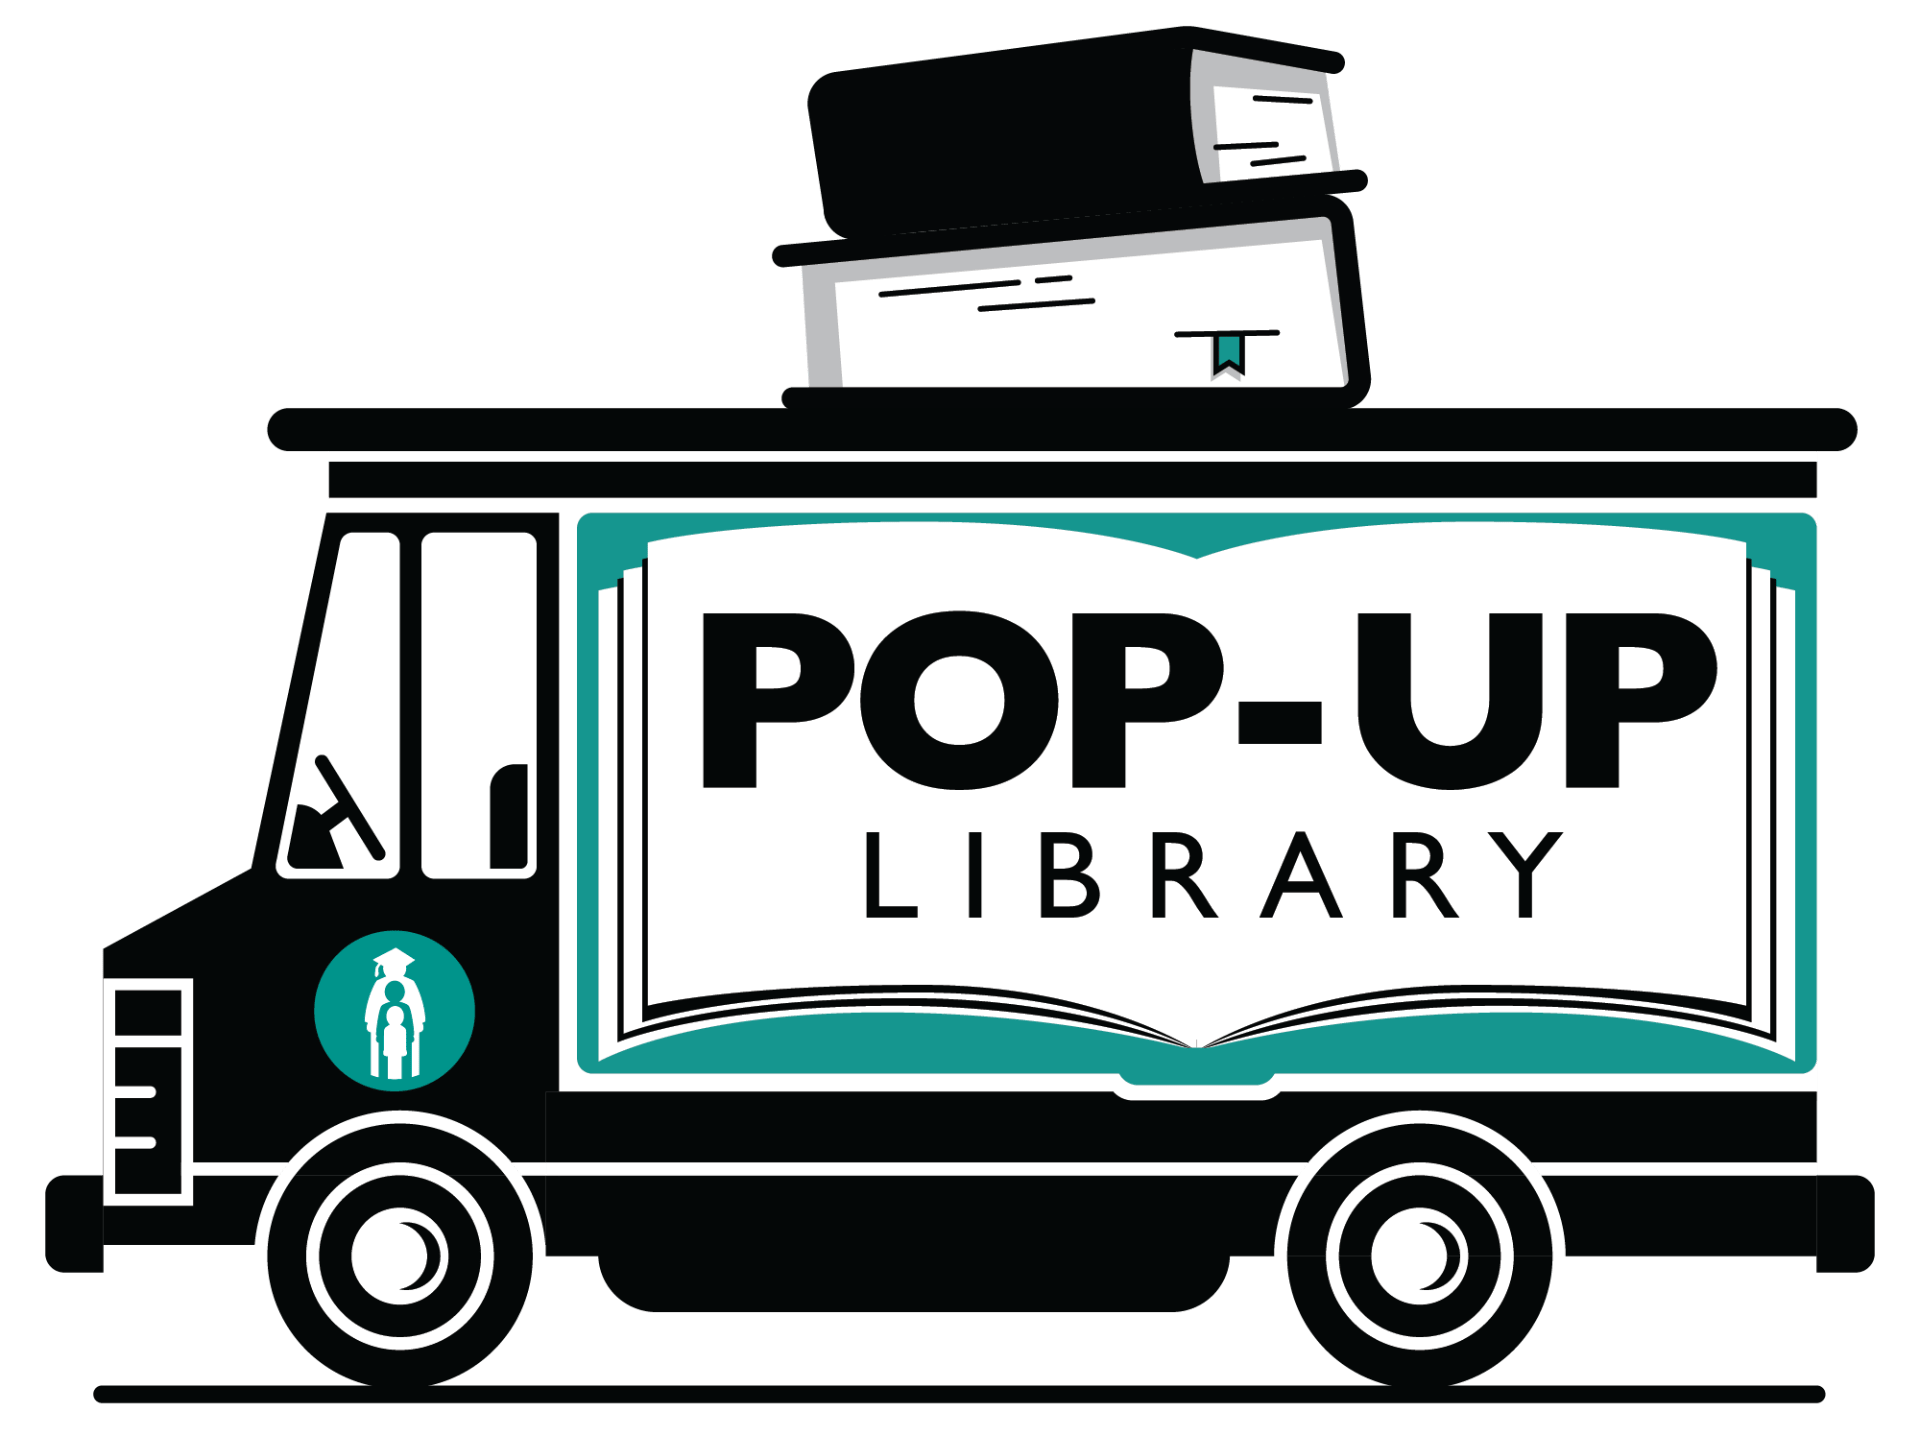 Pop-up Library bus